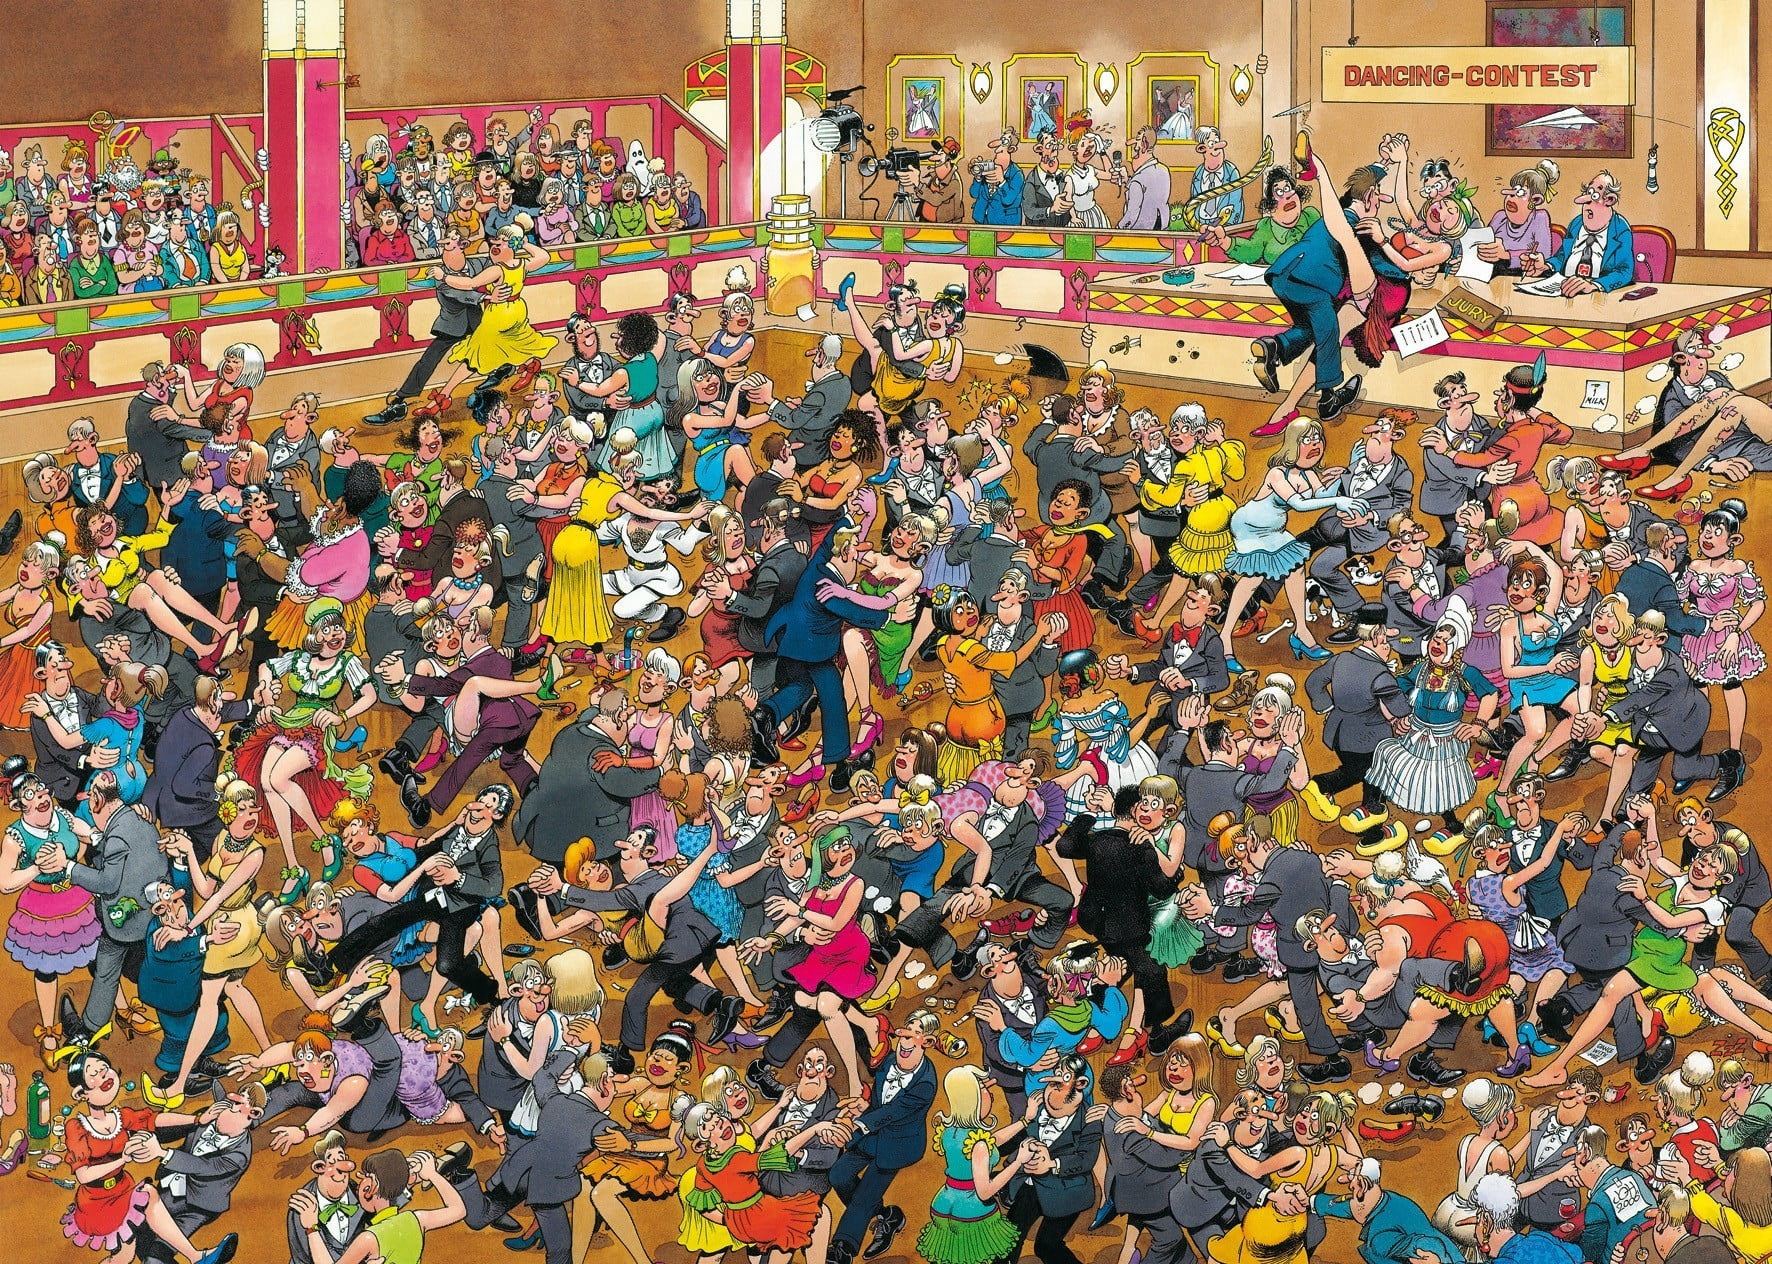 couples dancing on floor graphic art, Mad Magazine, artwork, detailed